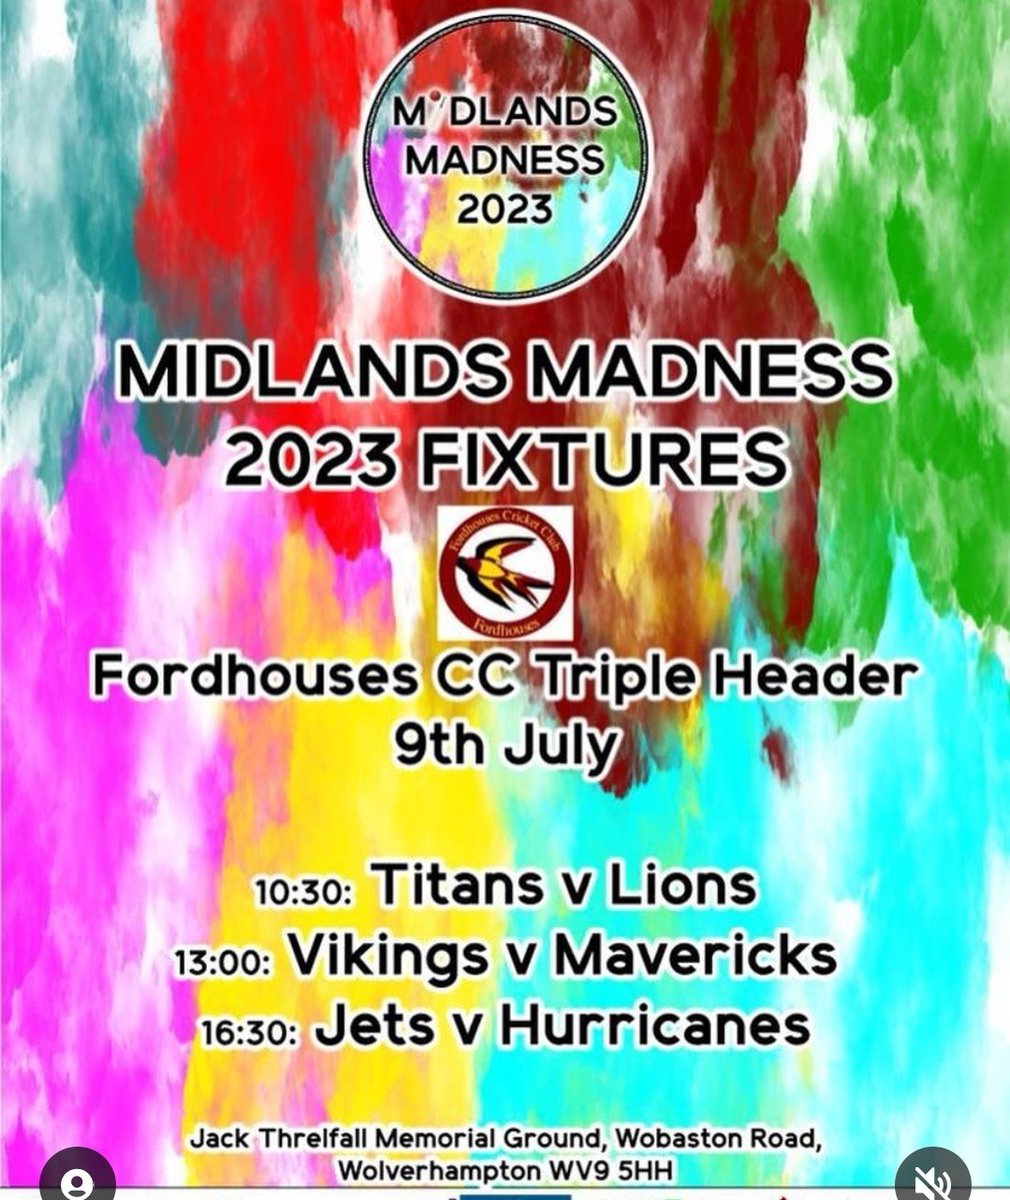 @FordhousesCC @TheWhistleF @AldersleySport @MatWinzor @WisdenCricket
Whistle foundation  brings it's summer madness to FCC this Sunday. Come down see some great cricket, have some laughs & support this great charity, bringing sport to EVERY child. Bar open & food served all day.